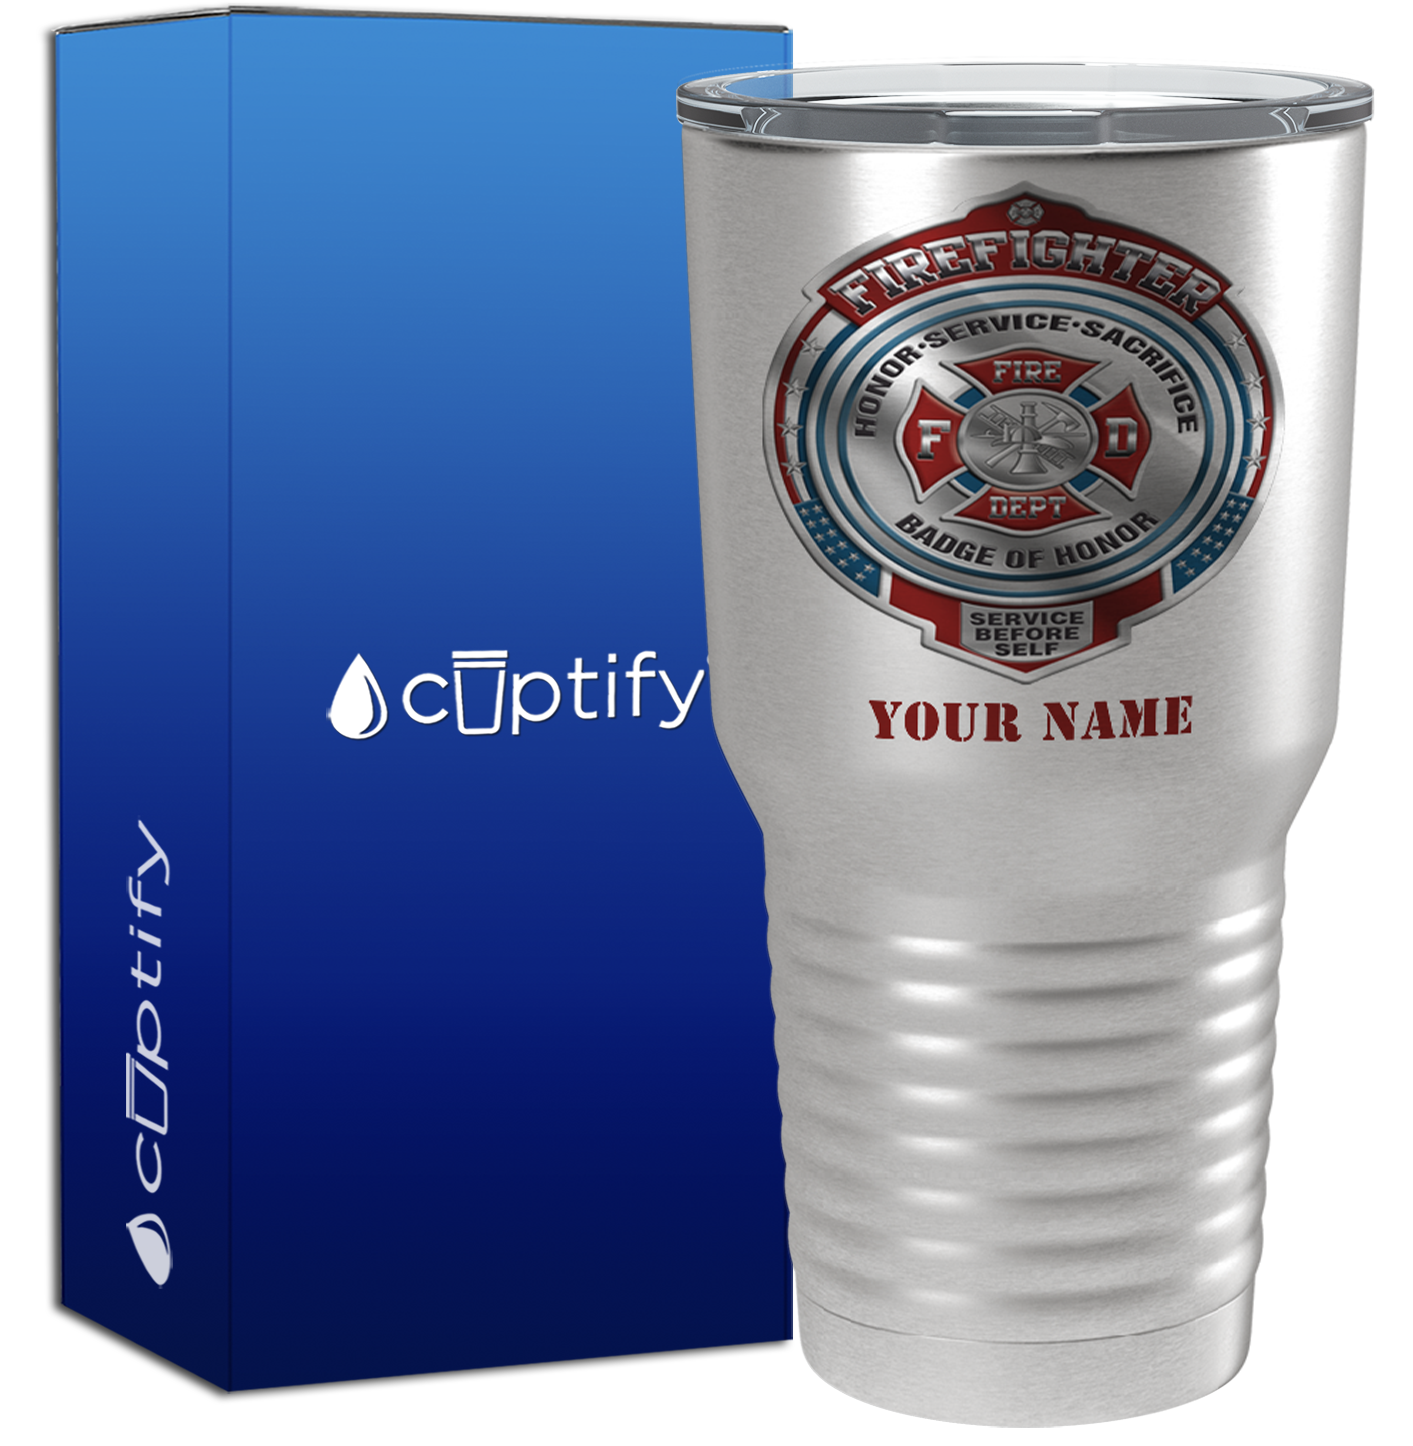 Personalized Firefighter Badge of Honor on Stainless 30oz Firefighter Tumbler